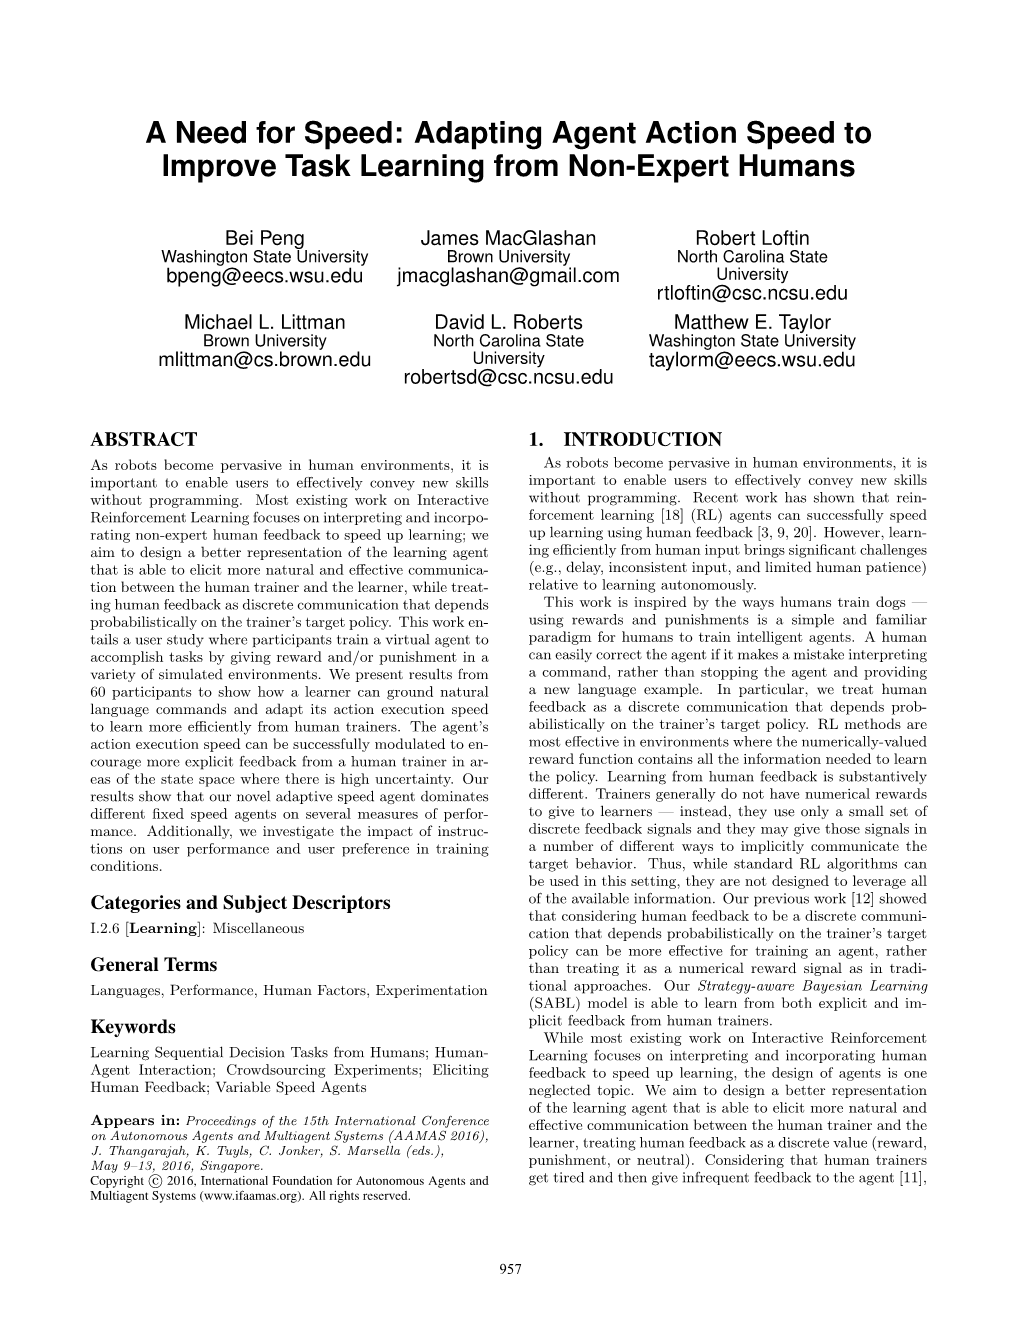 Adapting Agent Action Speed to Improve Task Learning from Non-Expert Humans